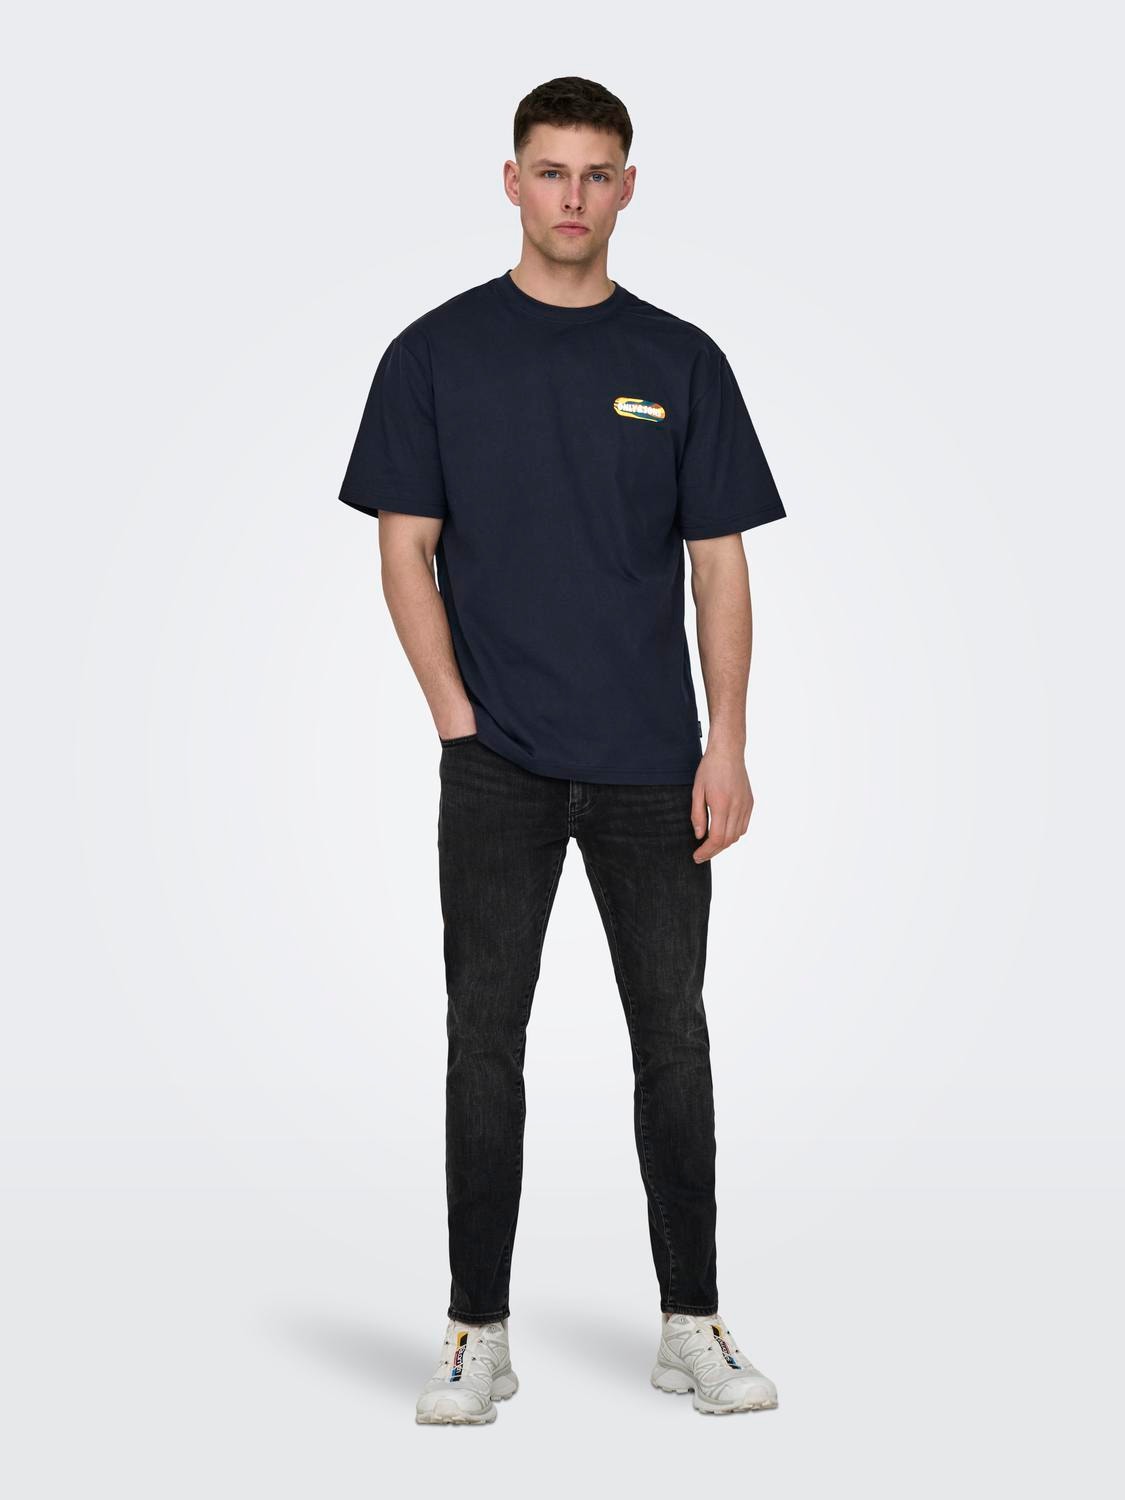 ONLY & SONS Relaxed Fit Round Neck T-Shirt -Dark Navy - 22029091